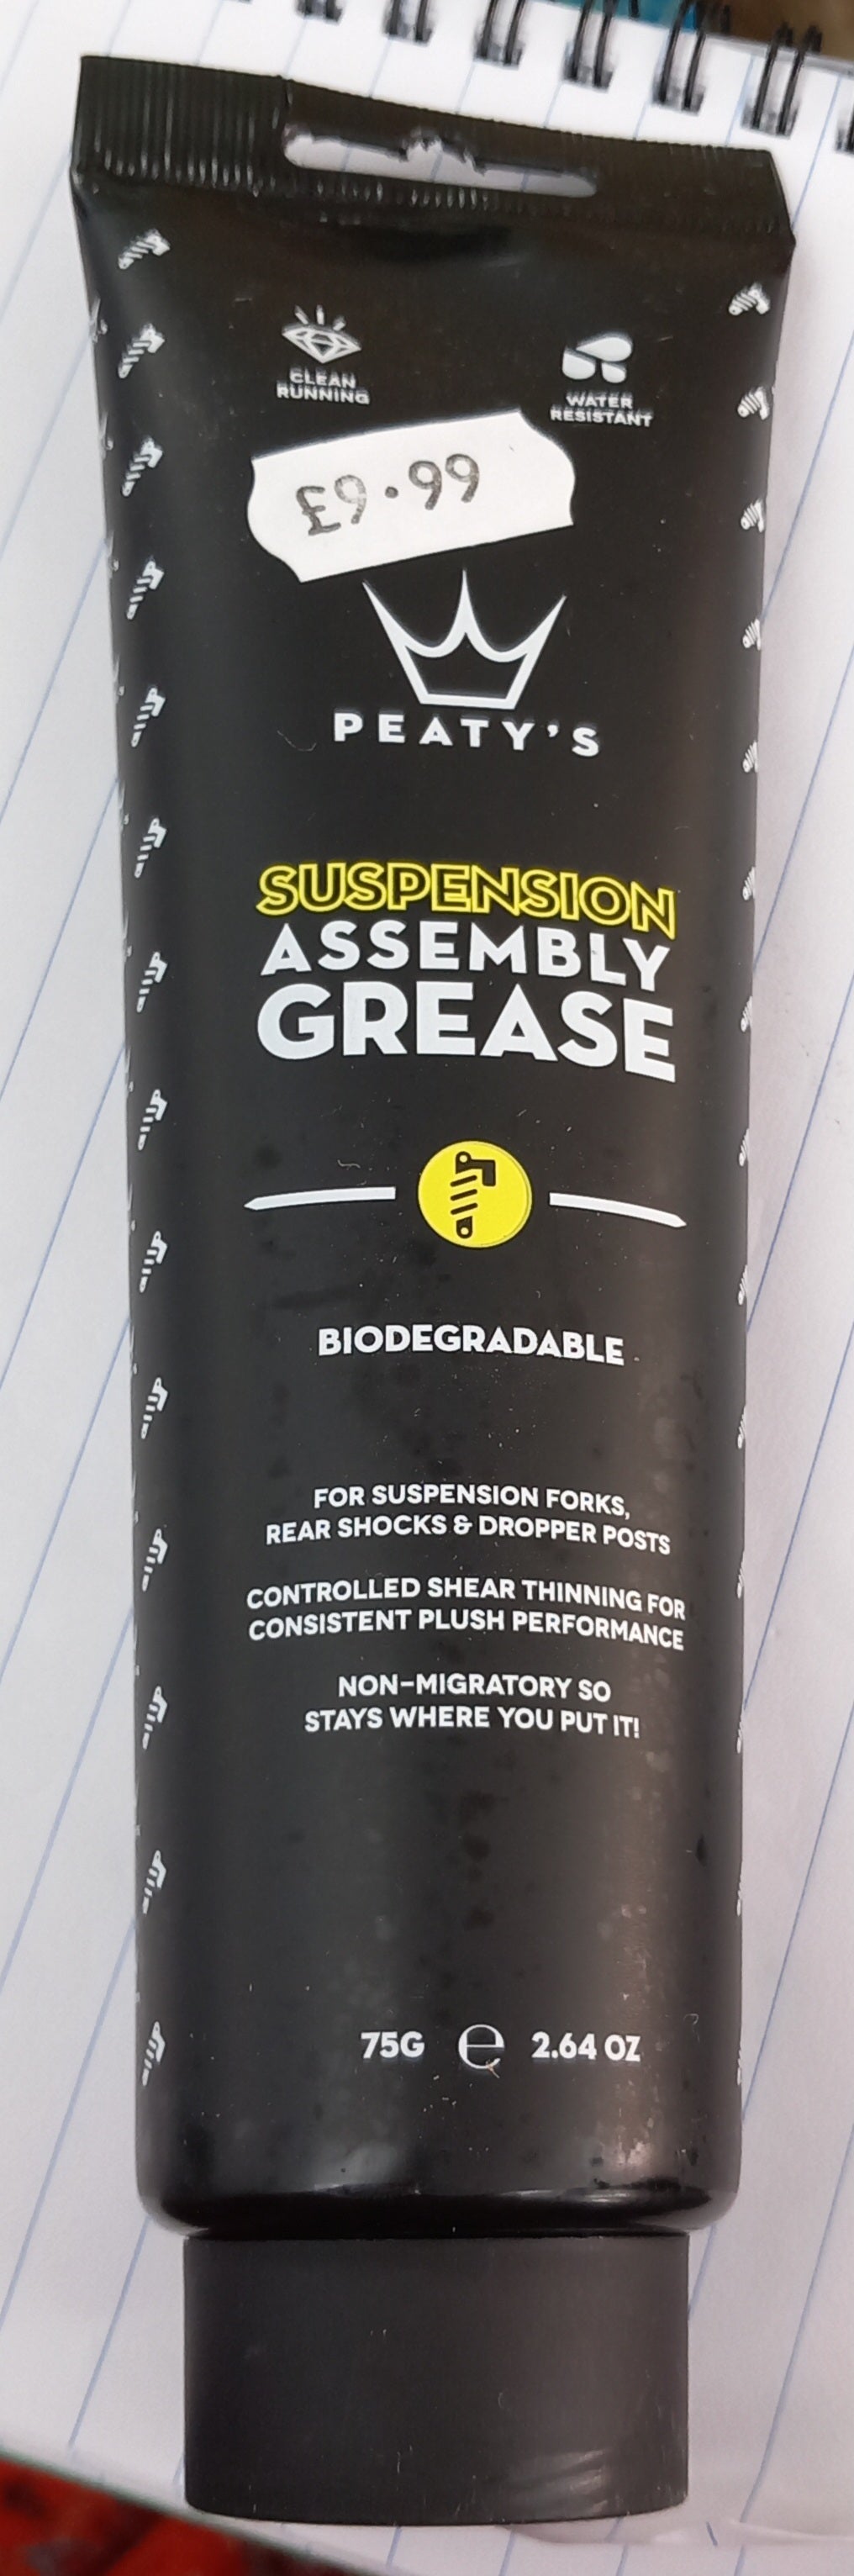 Peaty's suspension assembly grease